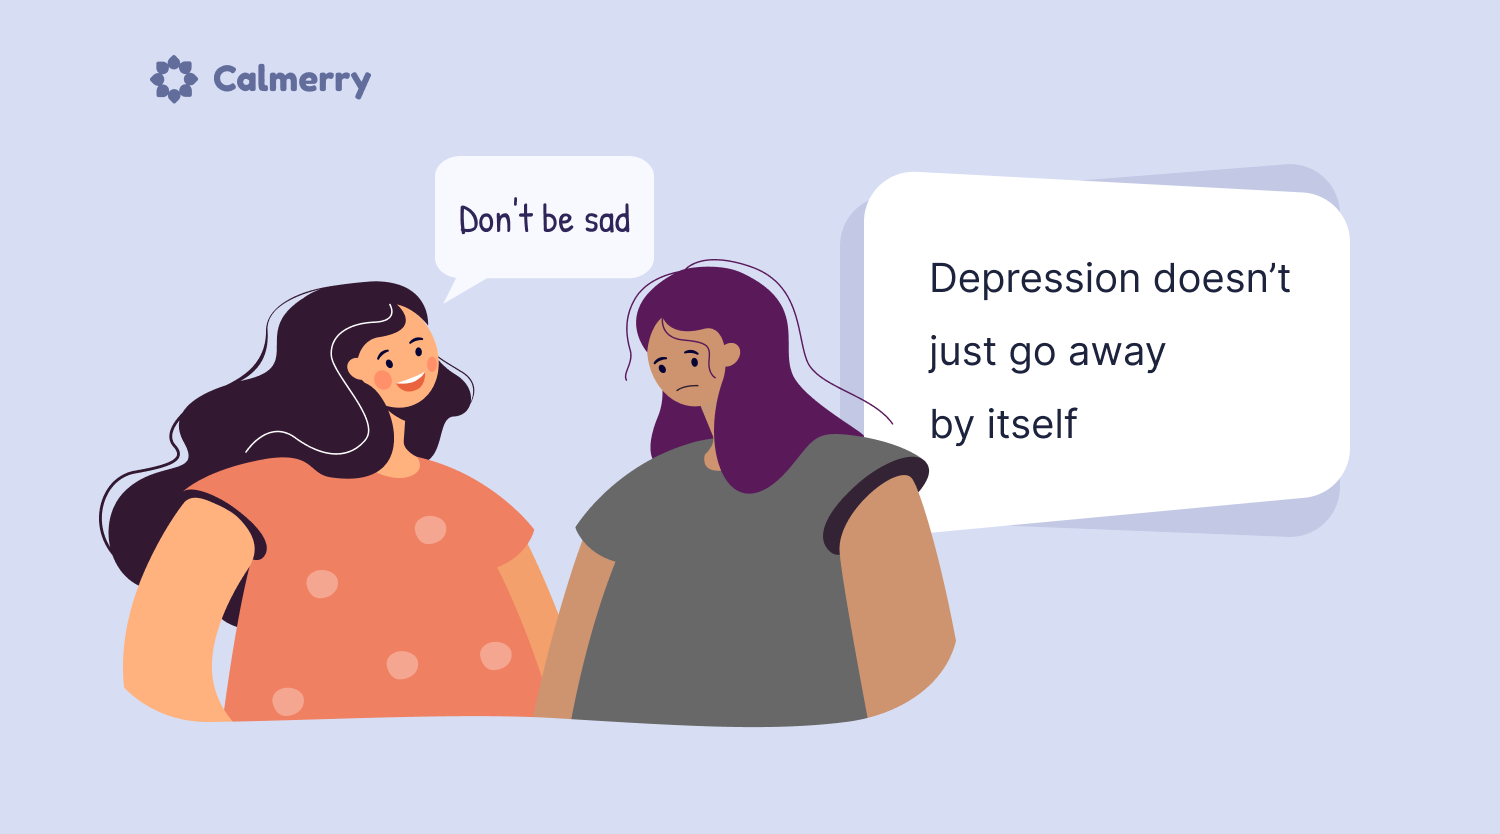 Depression doesn’t just go away by itself